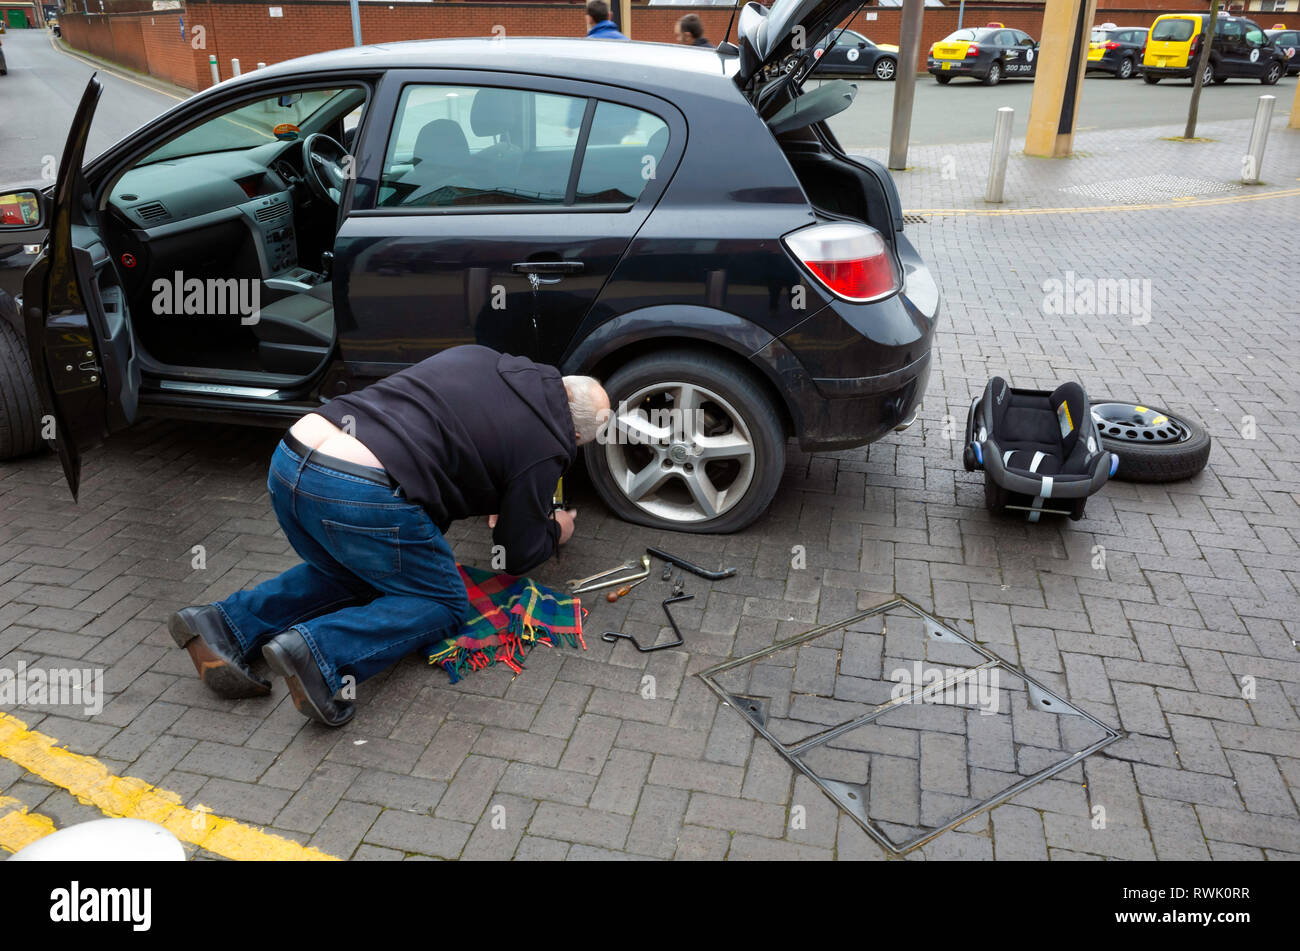 Elderly man kneeling beside his car preparing to change the rear wheel with its punctured tyre in a town centre Stock Photo